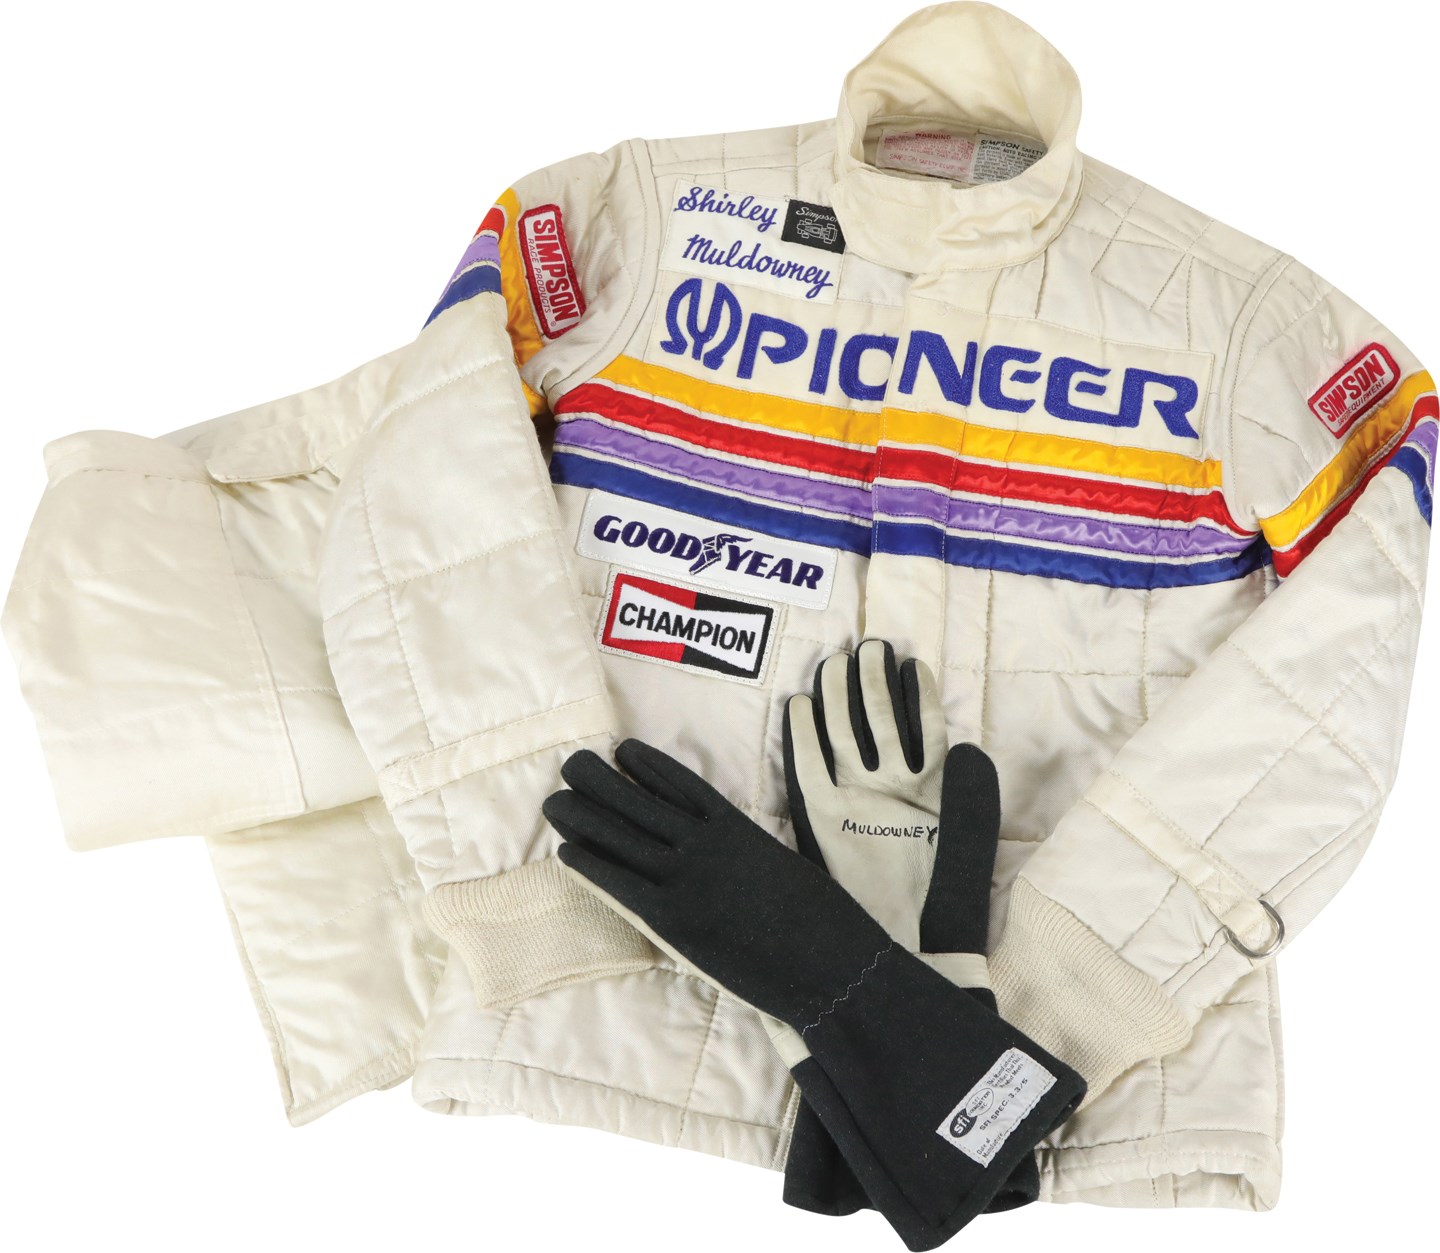 Olympics and All Sports - 1980s Shirley Muldowney Race Worn Fire Suit and Gloves